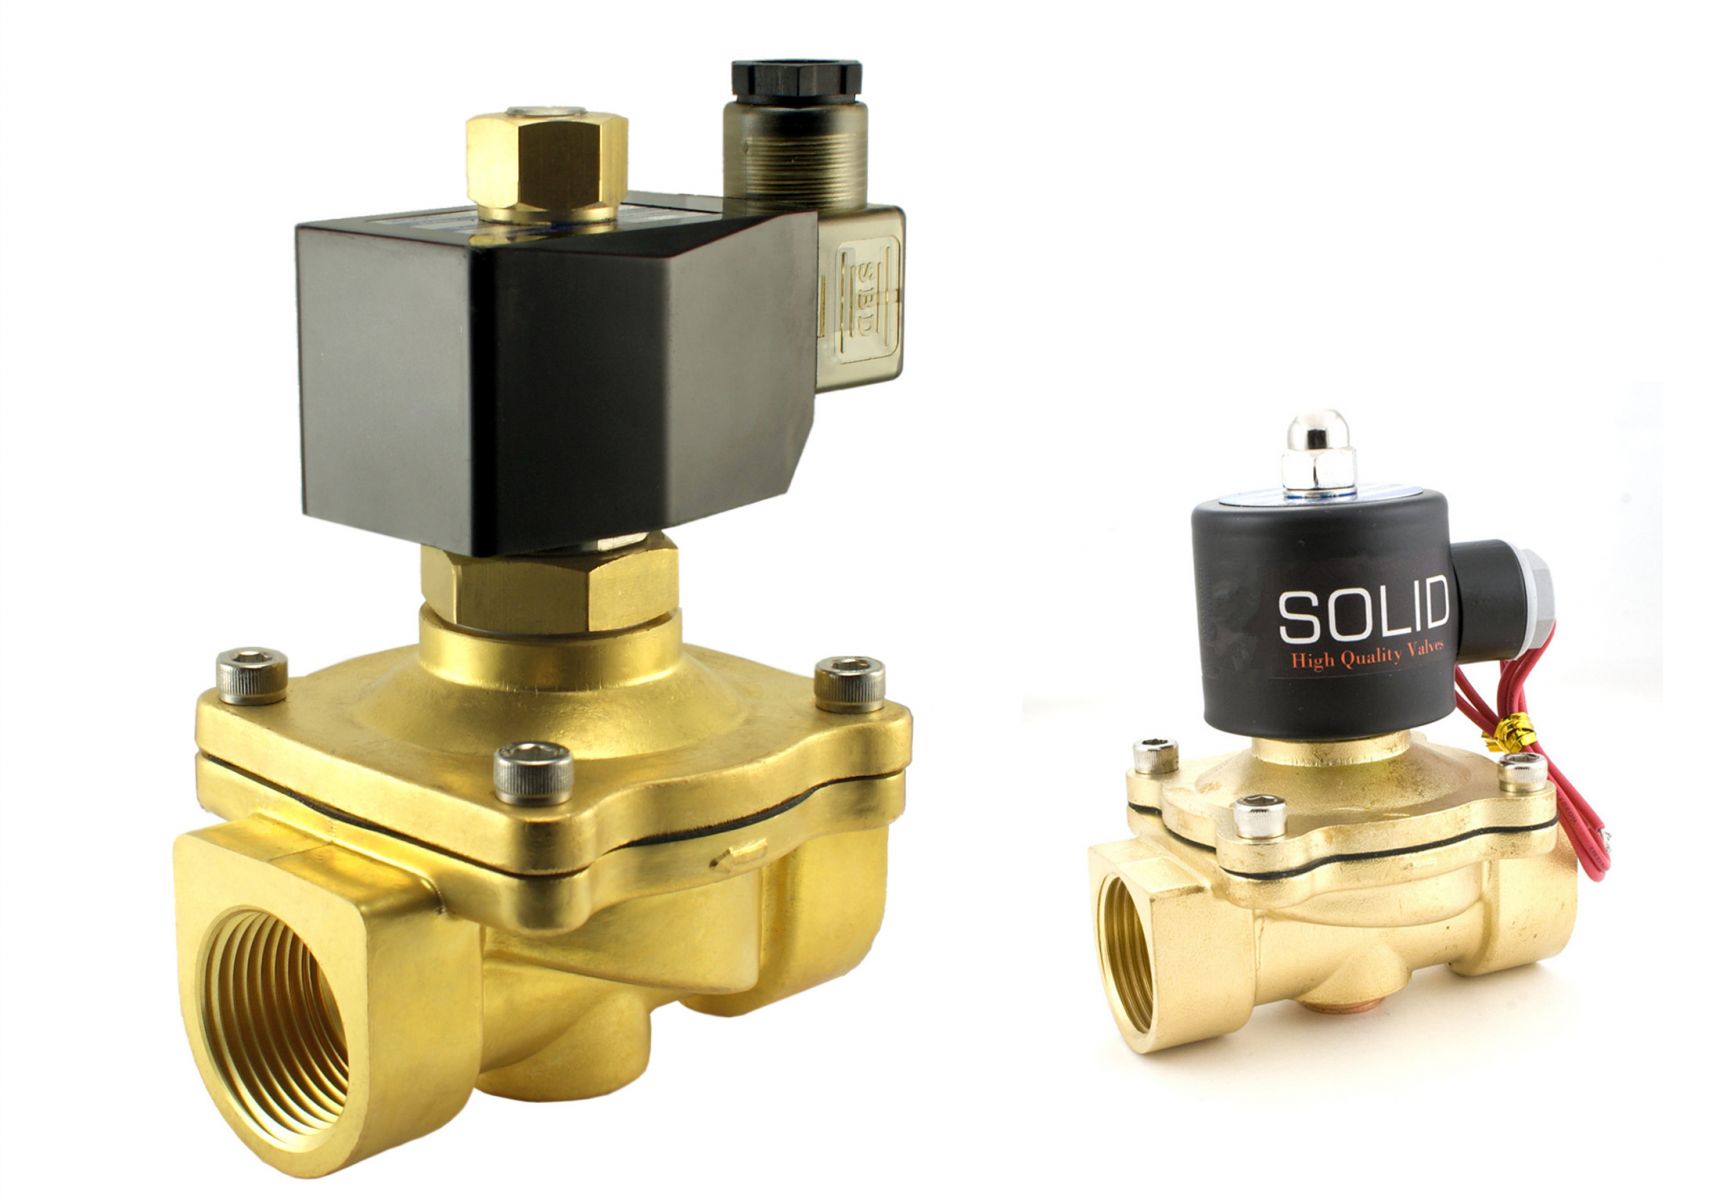 Difference between Solenoid Valves and Electric Valves